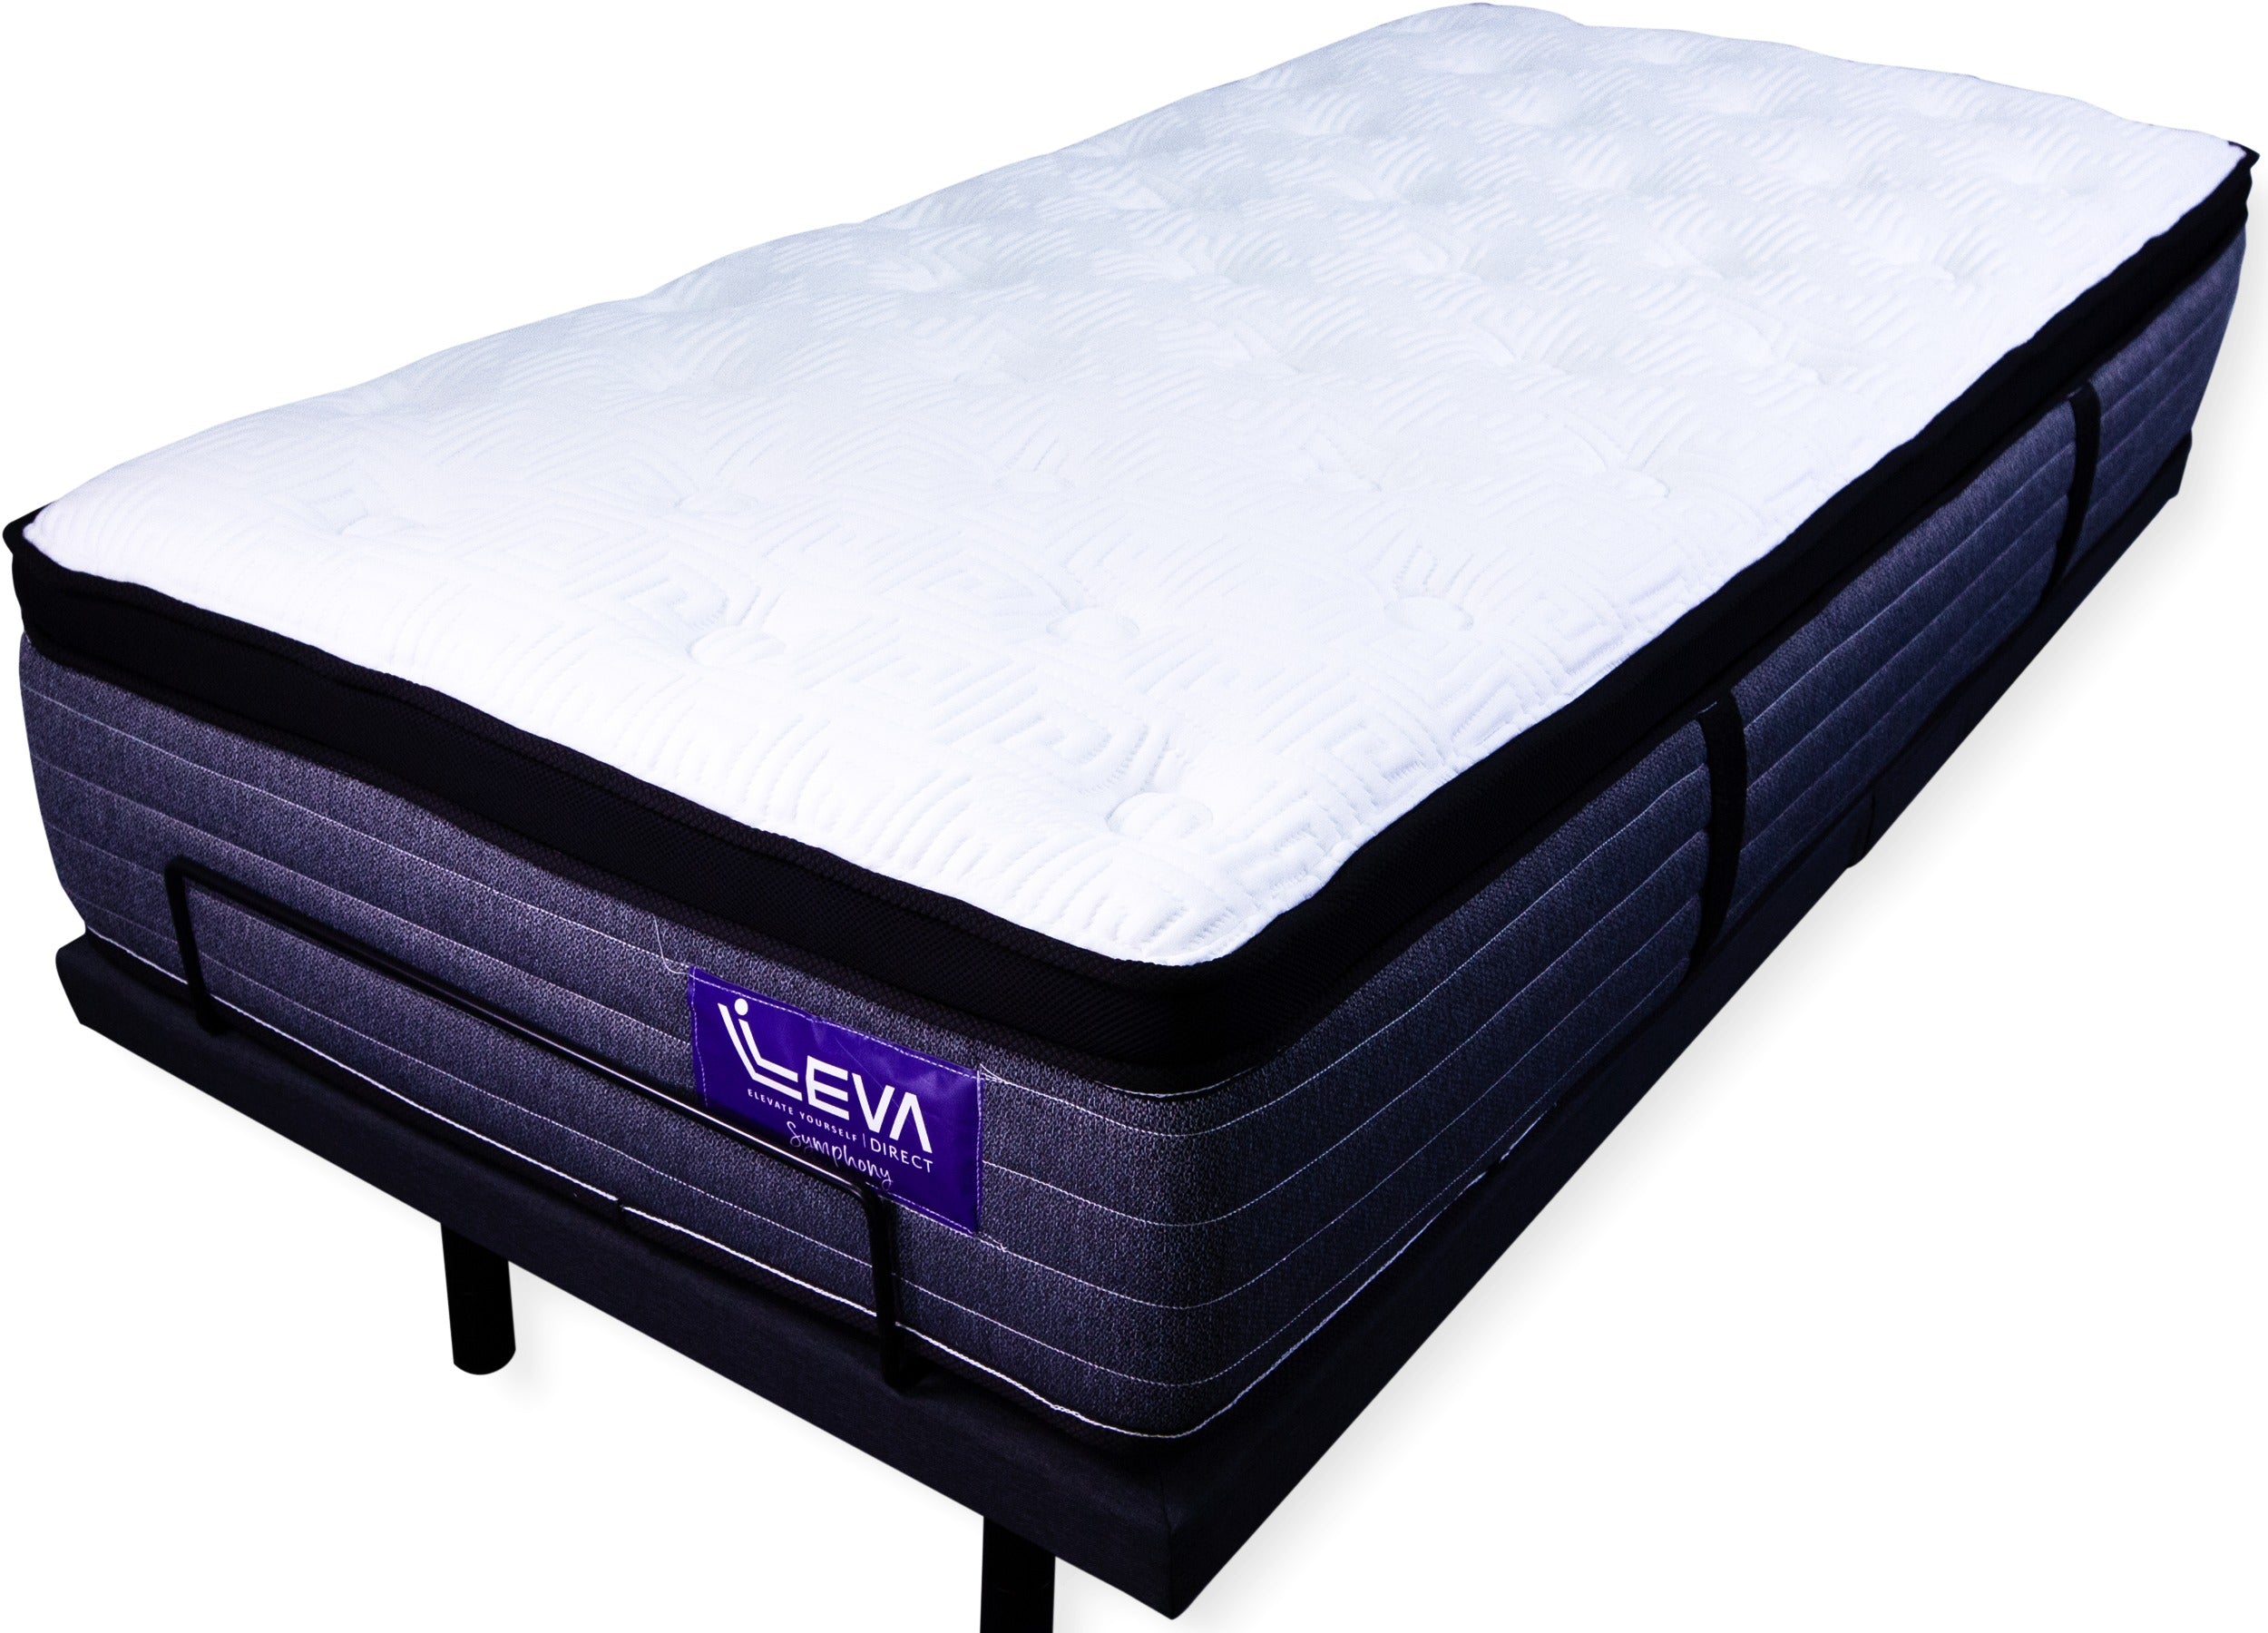 Symphony TwinXL Adjustable Bed